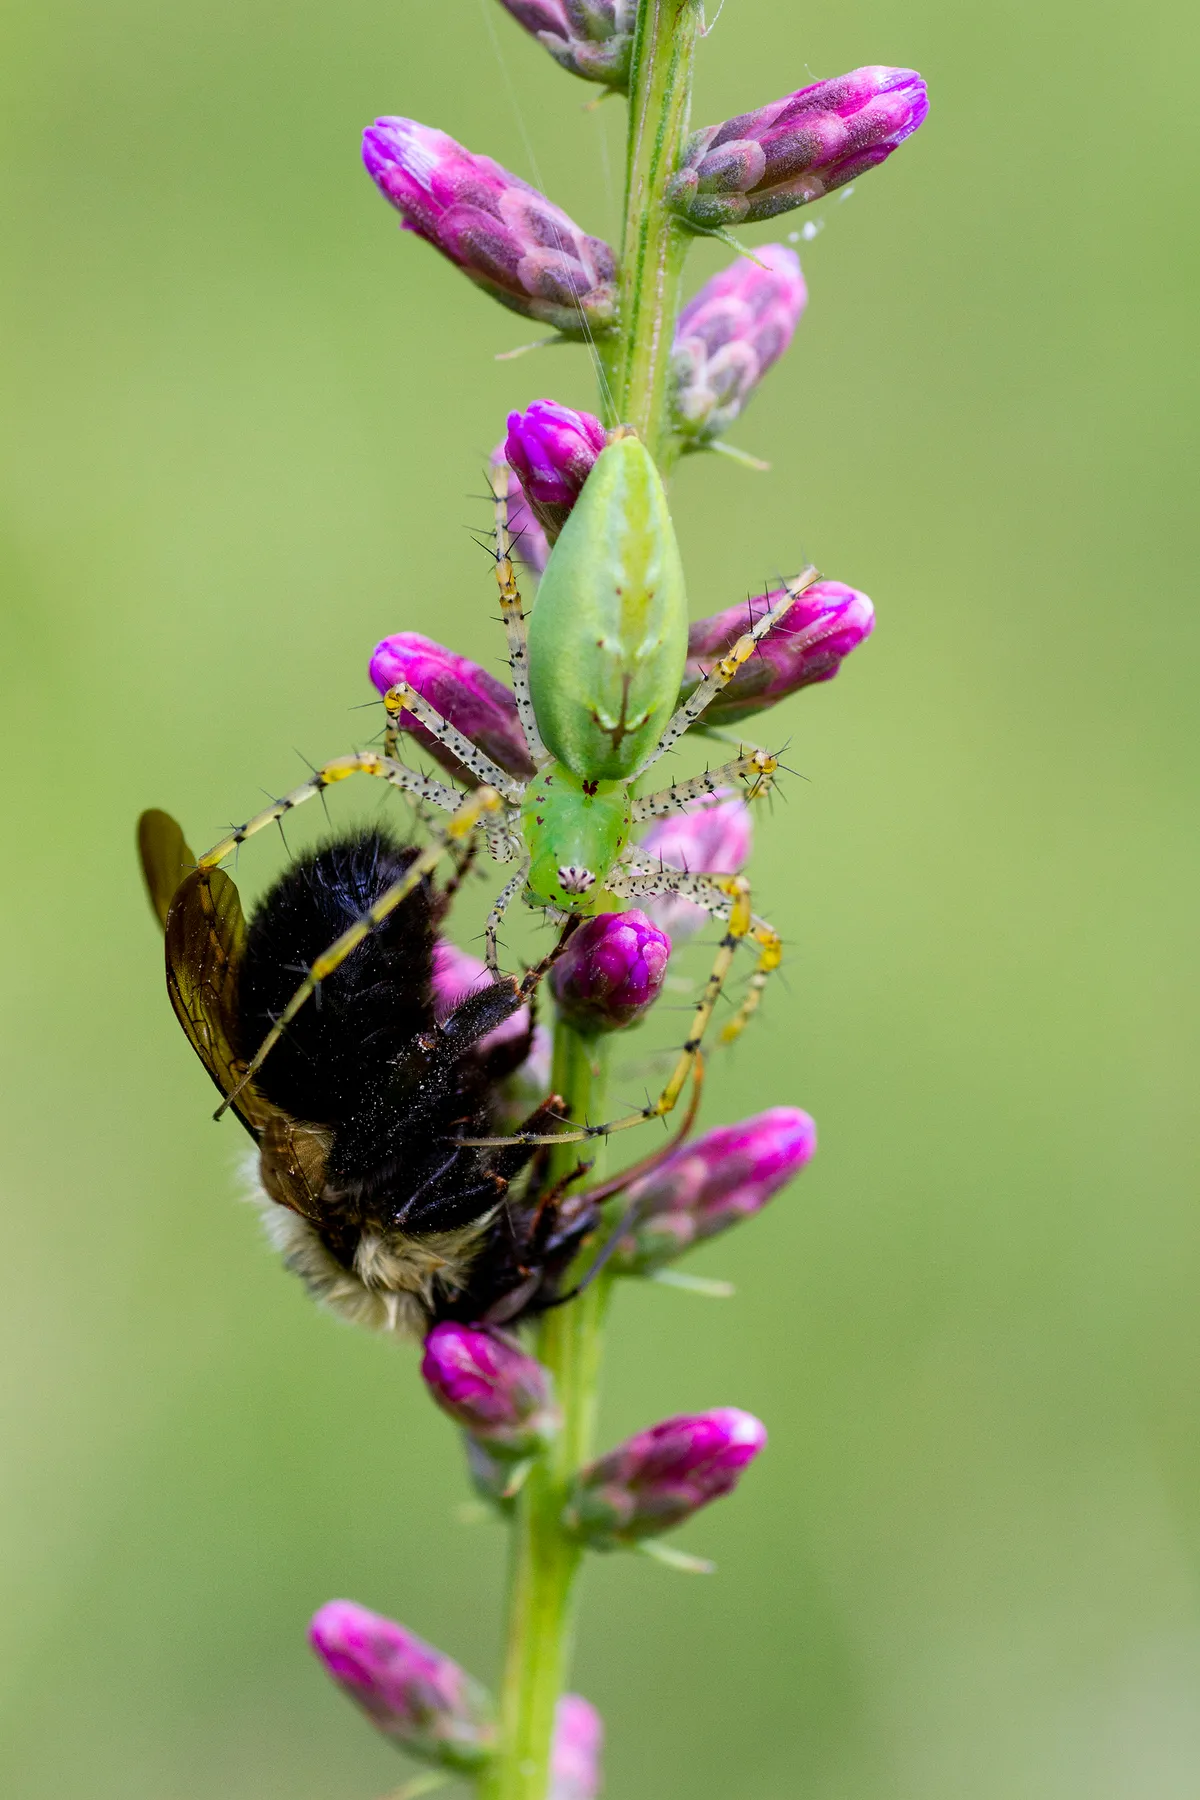 A green lynx spider (Peucetia viridans) rests on a vibrant pink budding Liatris with its hefty bumblebee catch.